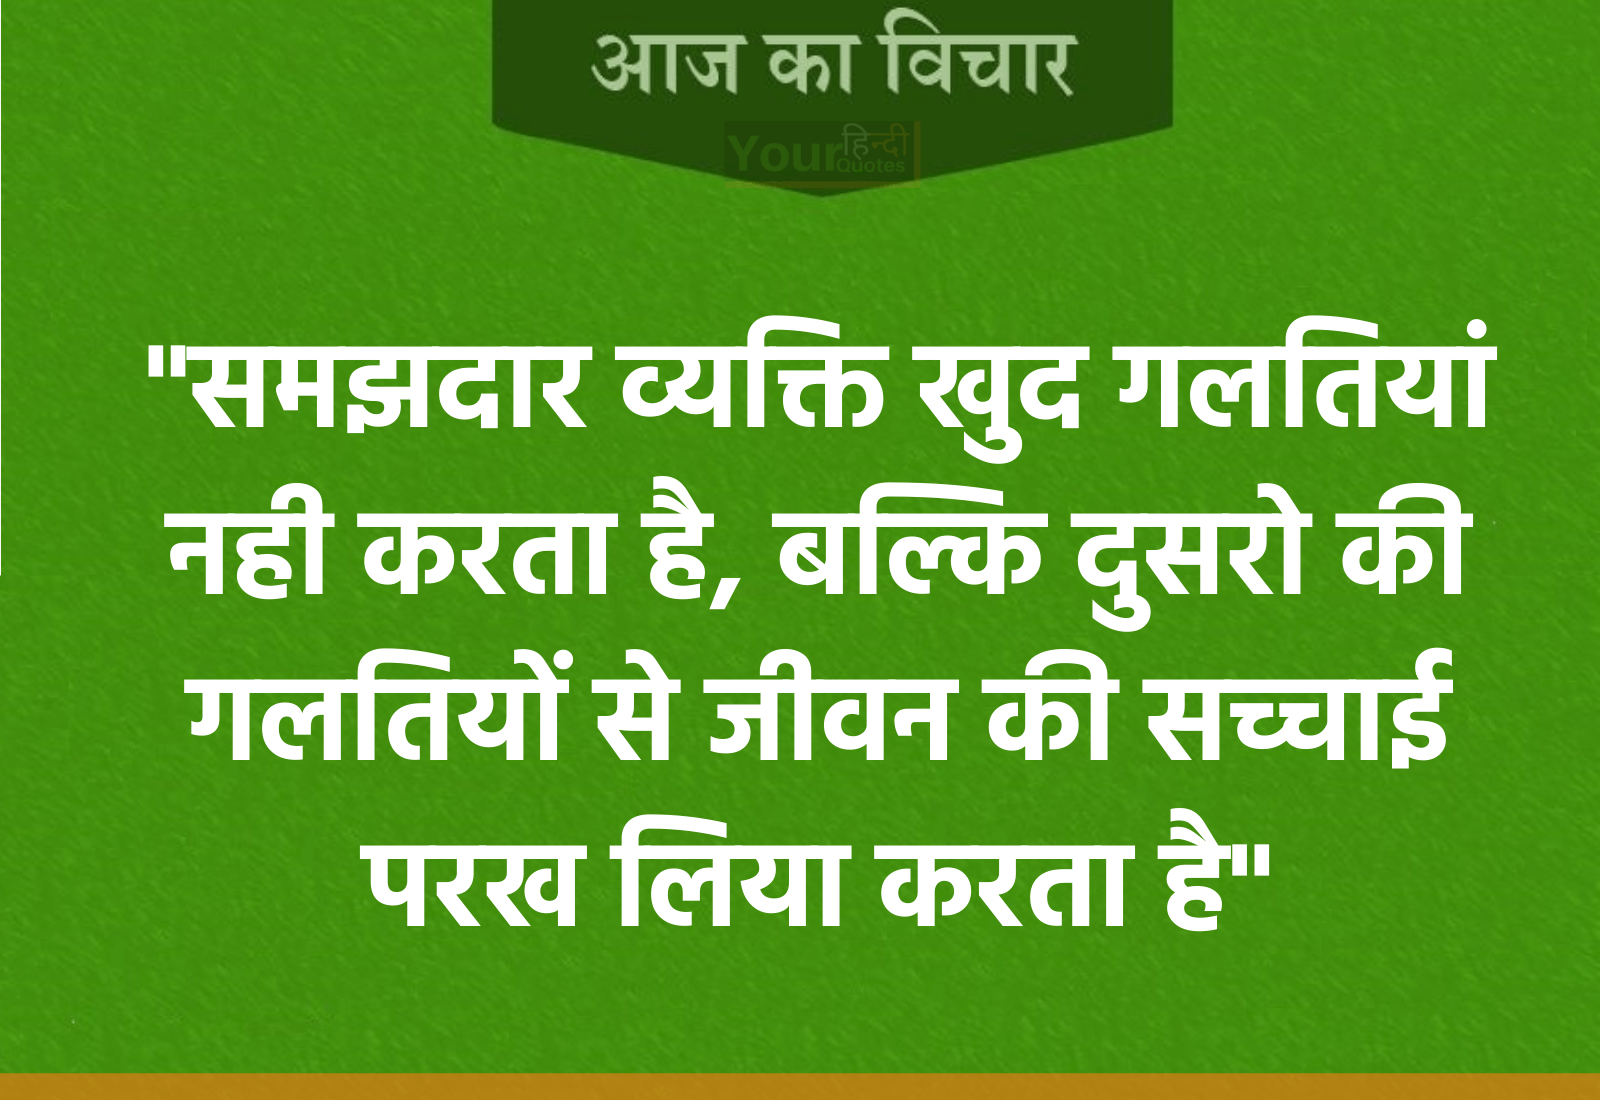 Quotes Hindi Me Images